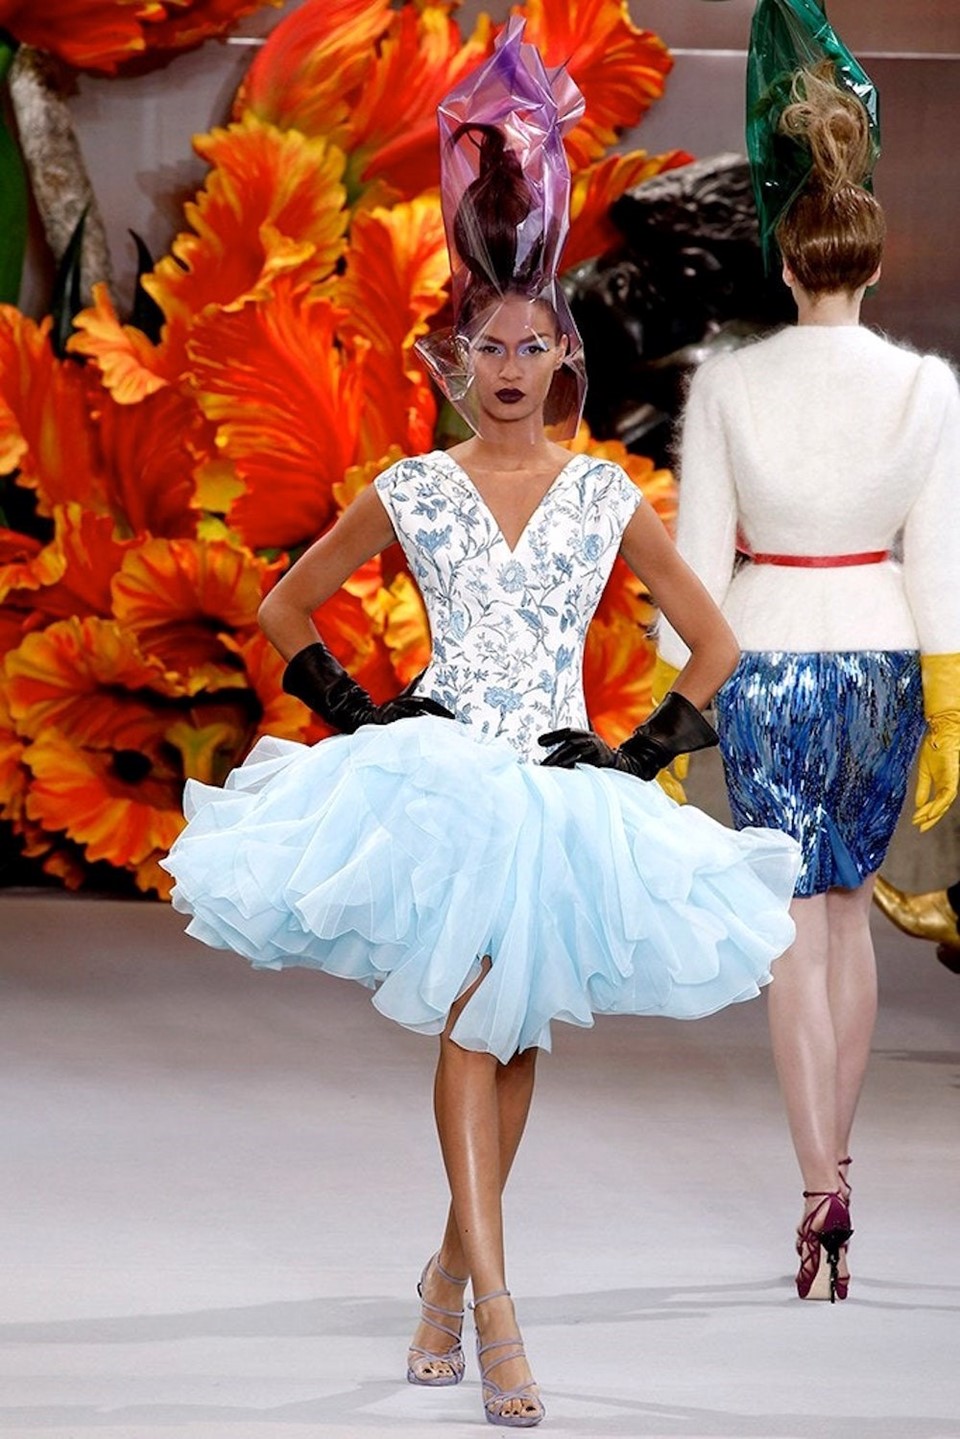 Galliano-less Dior couture show fails to inspire; notes from other designers